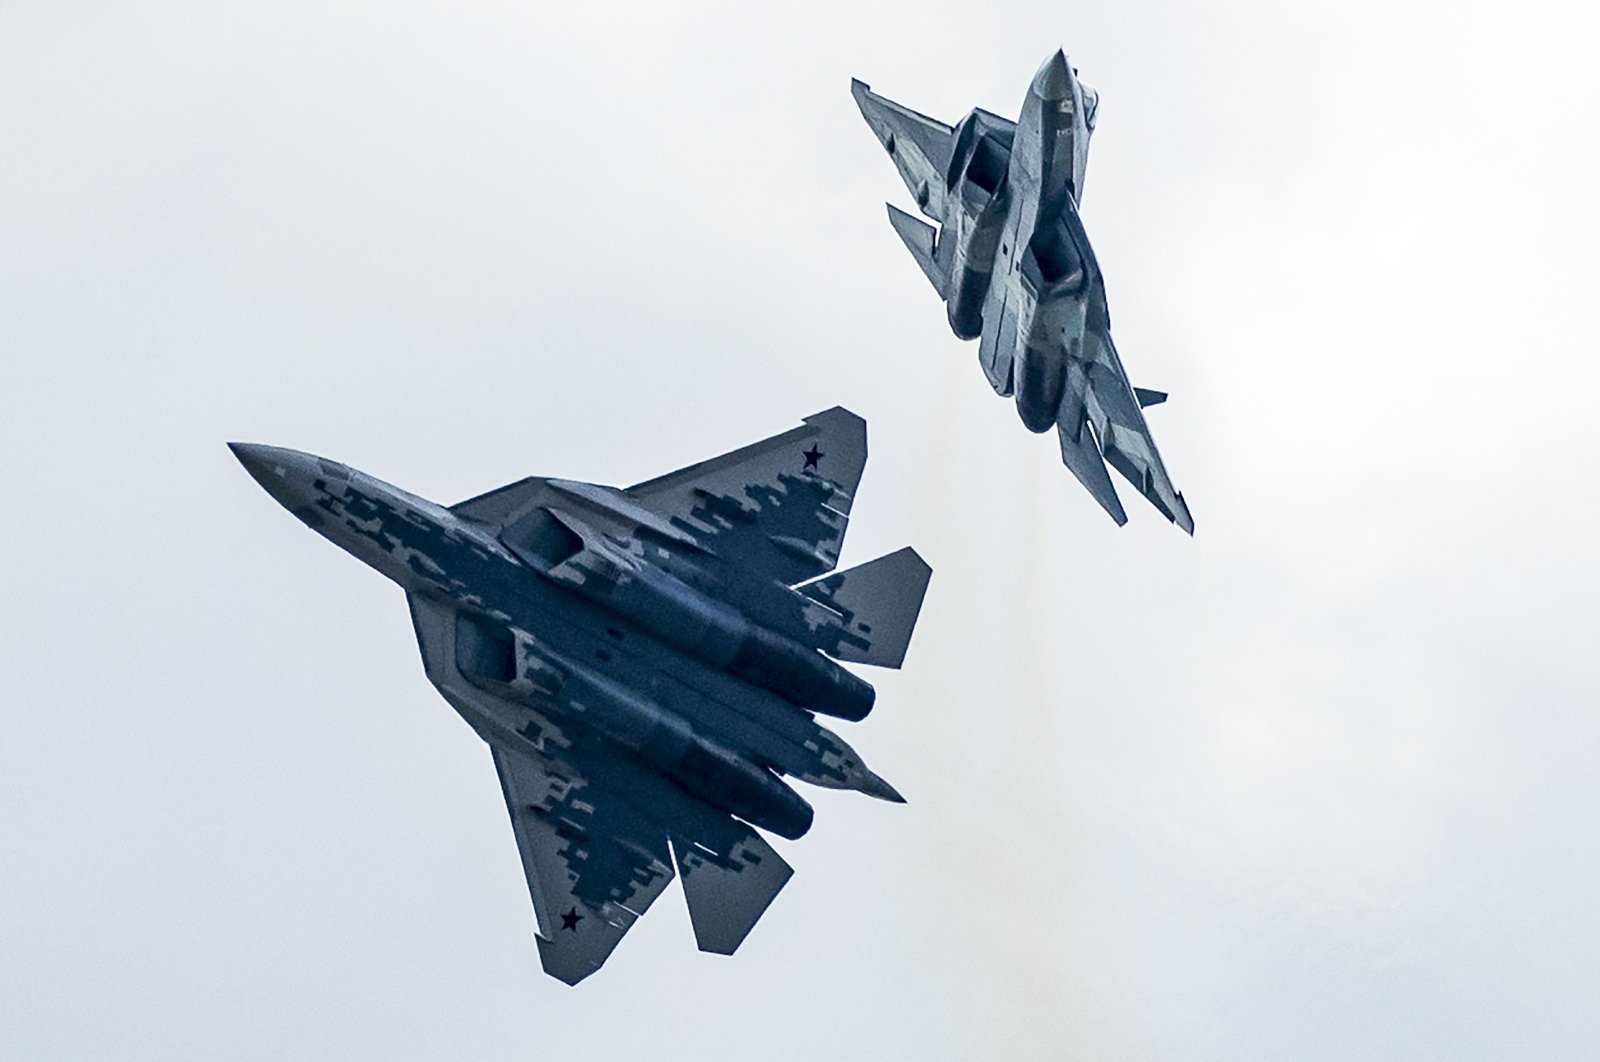 Russian Air Force Sukhoi Su-57 fifth-generation fighter jets perform during the MAKS-2019 International Aviation and Space Show in Zhukovsky, outside Moscow, Russia, Aug. 27, 2019. (AP Photo)